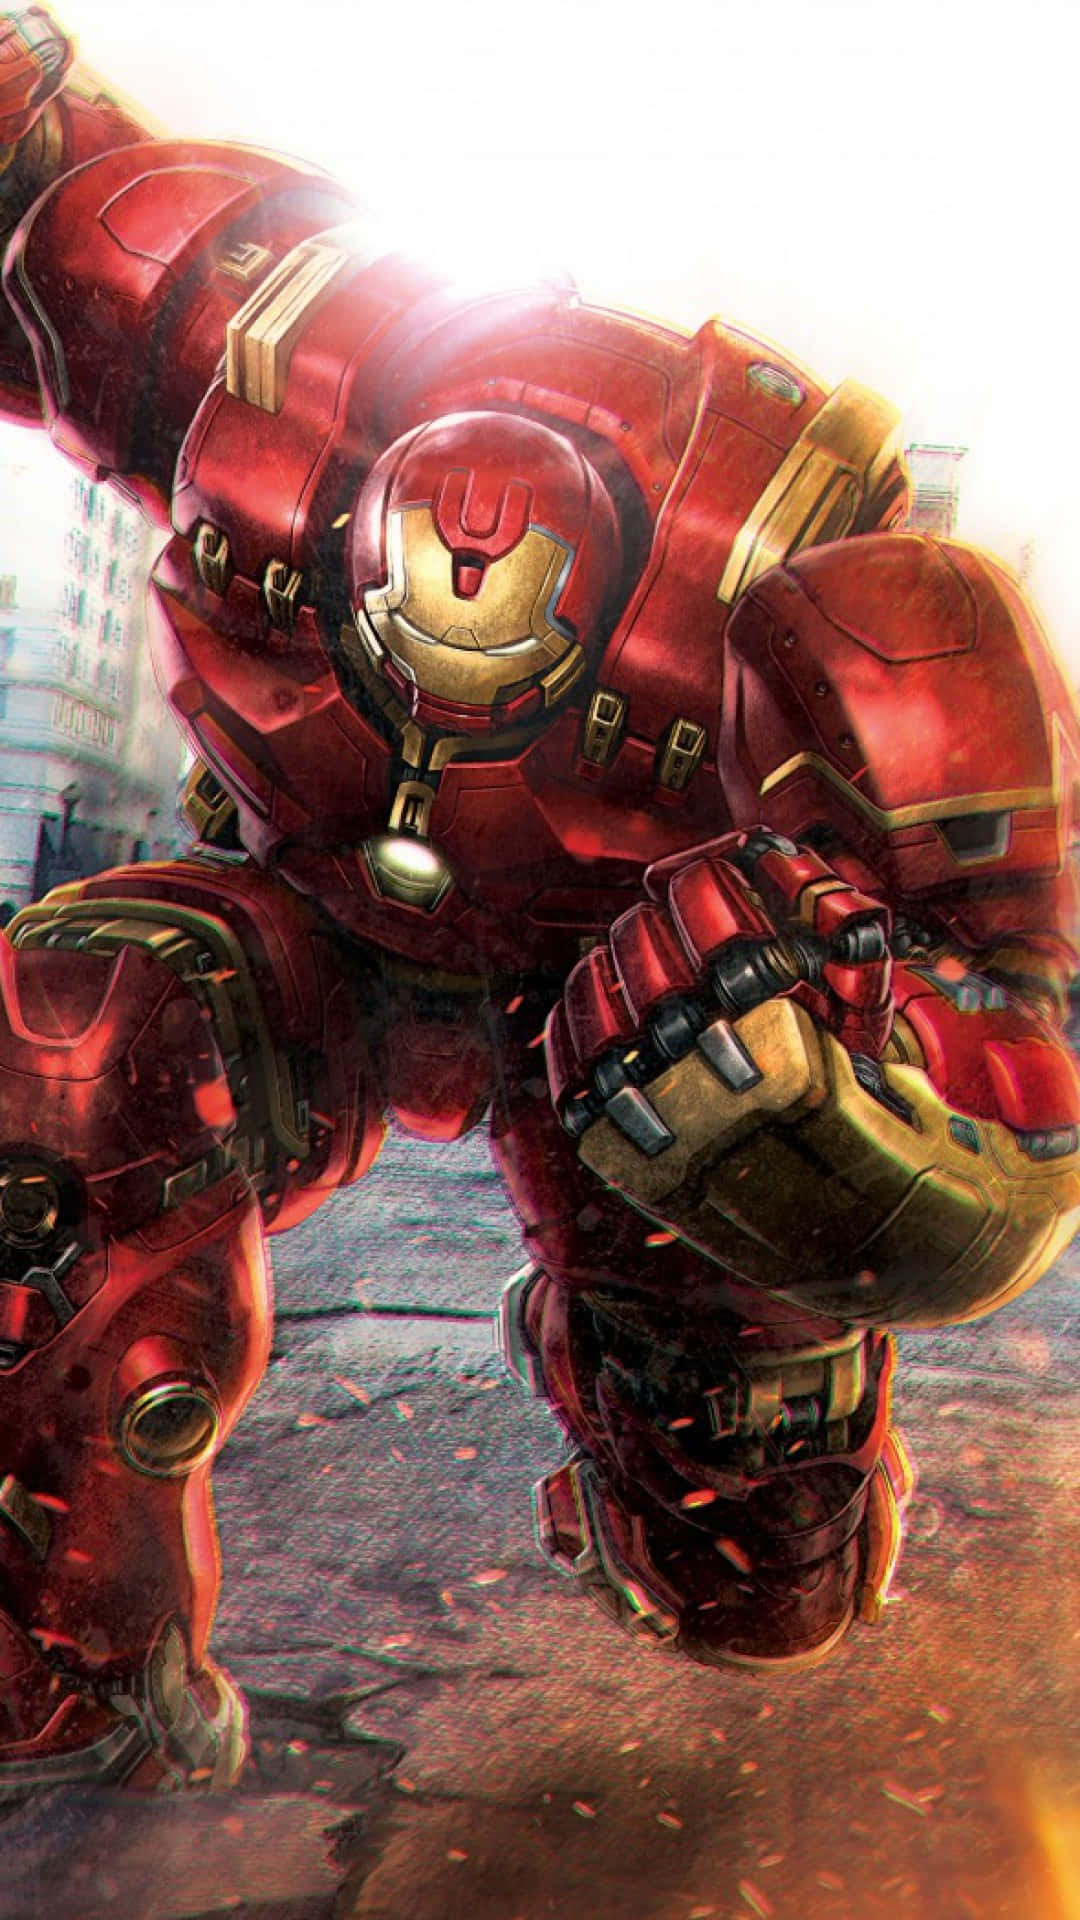 Unleash the Marvel Fan in You with the Cool Iron Man Iphone Wallpaper